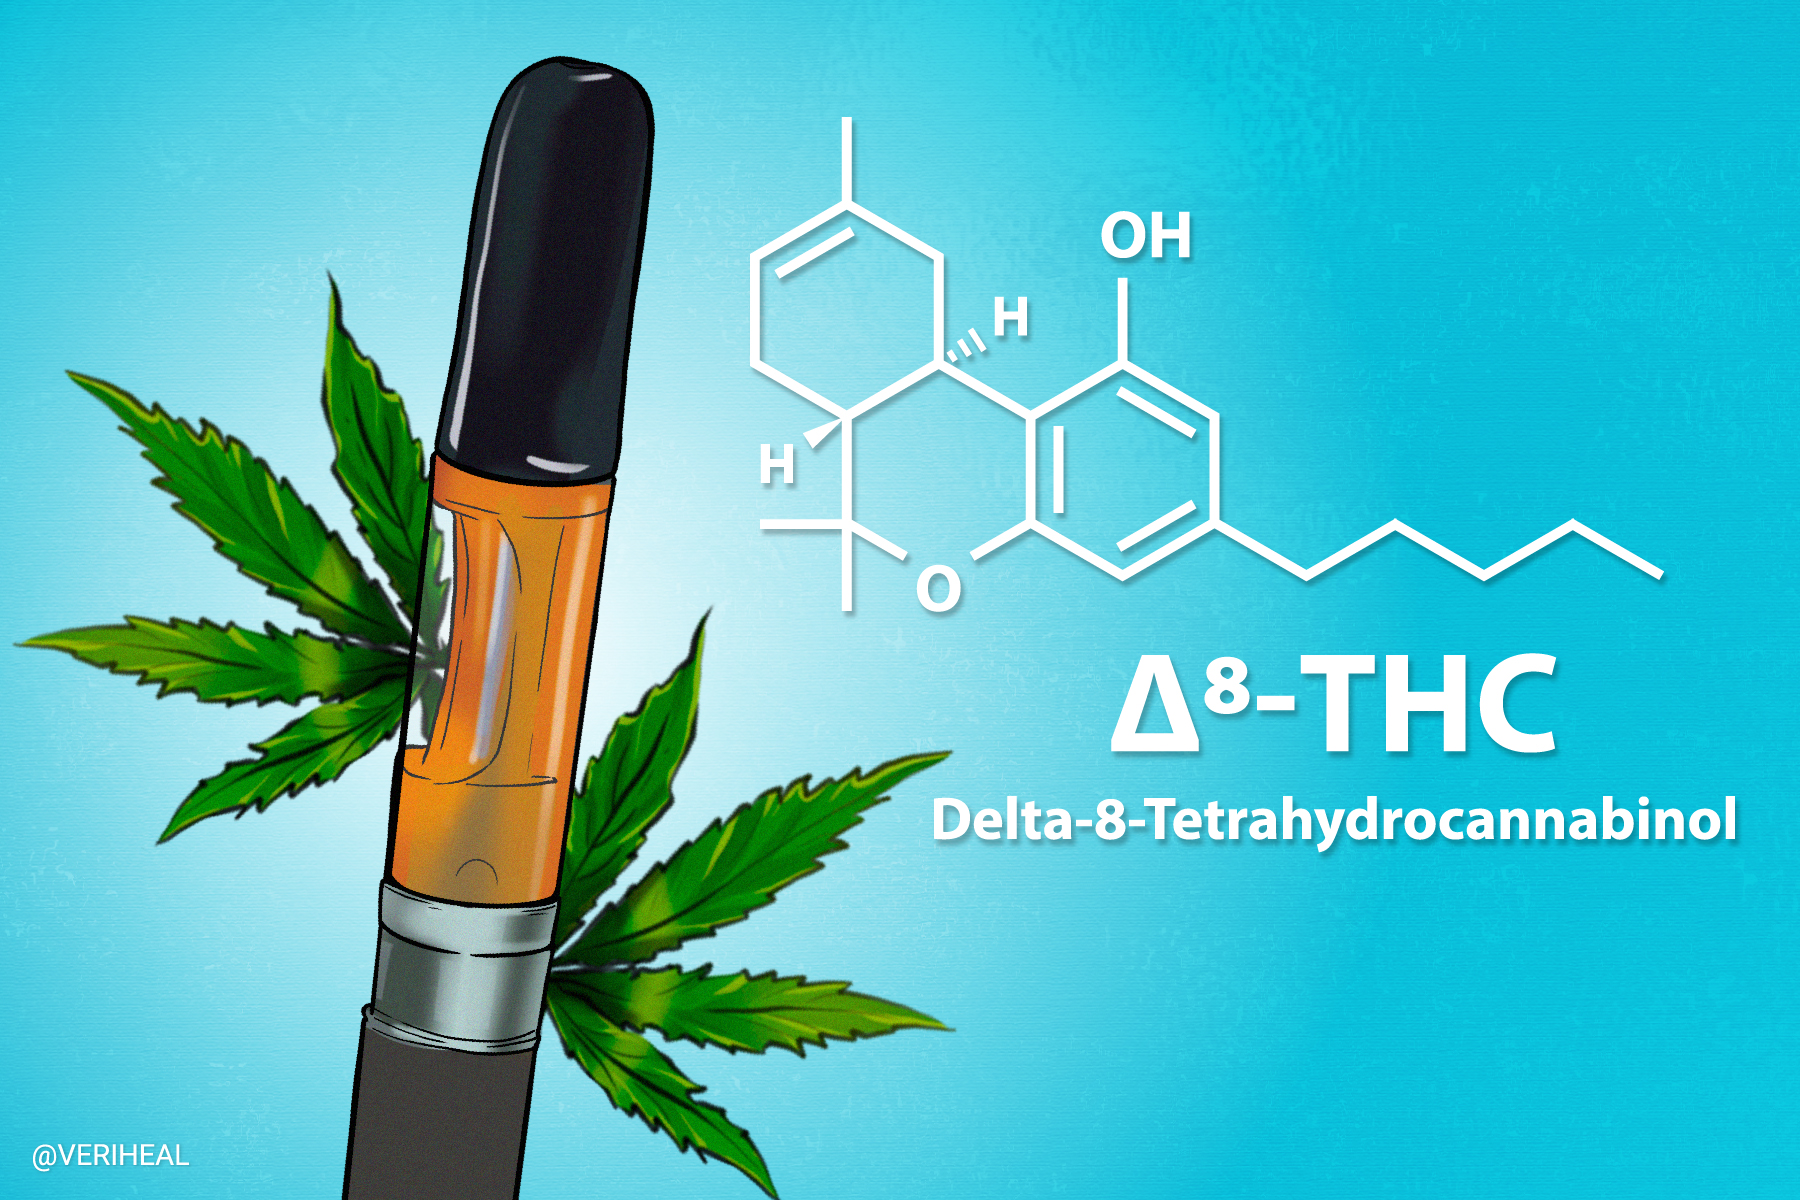 The Complete Guide to Delta-8 THC & Legal States